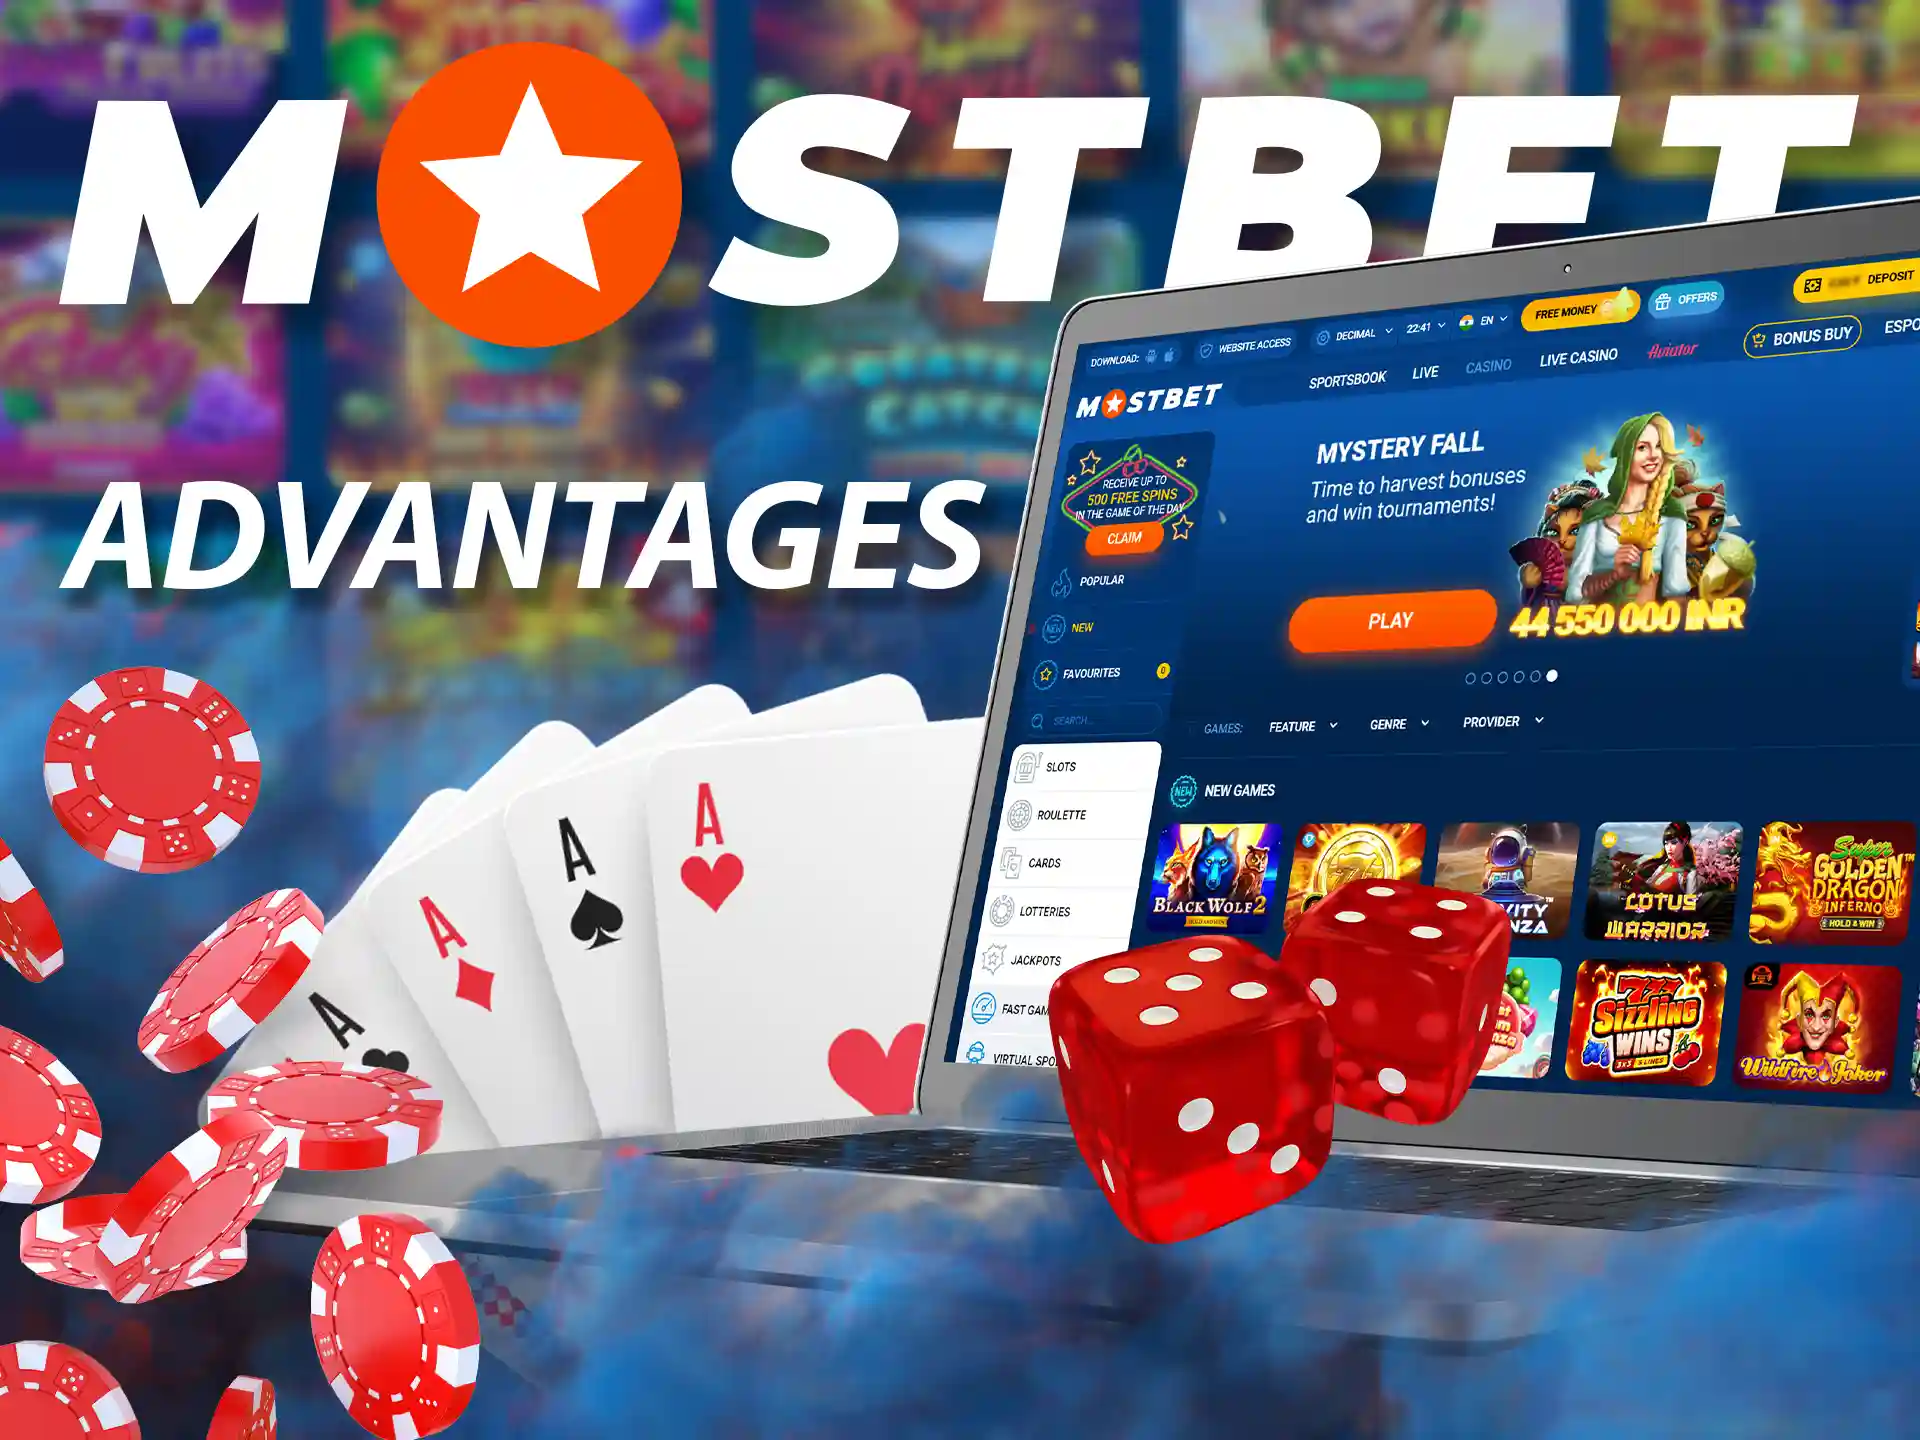 Mostbet Casino has many advantages for its players.